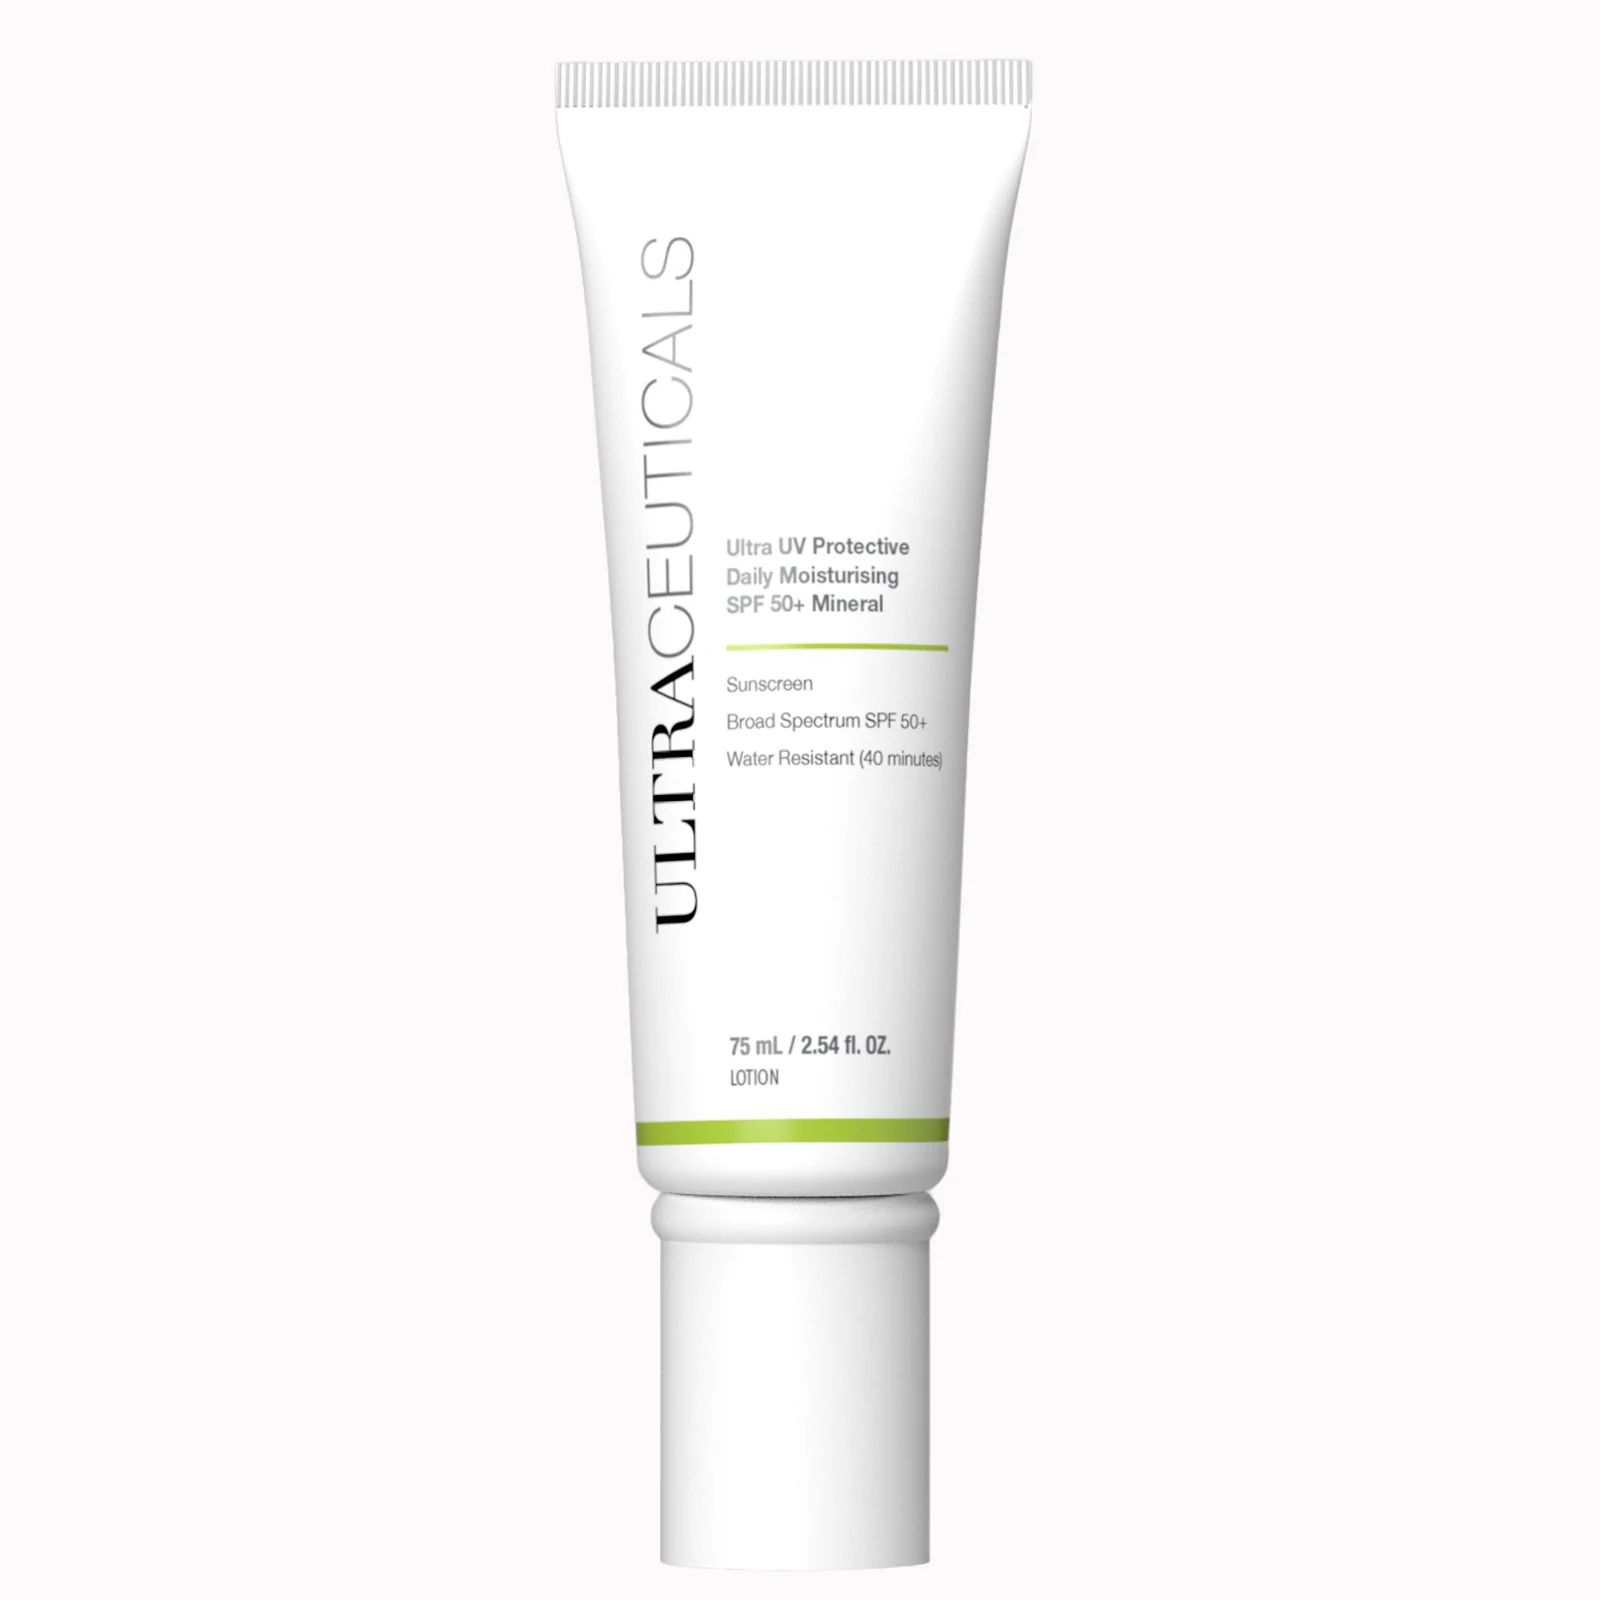 Ultra UV Protective Daily Moisturising SPF50+ Mineral | Ultraceuticals